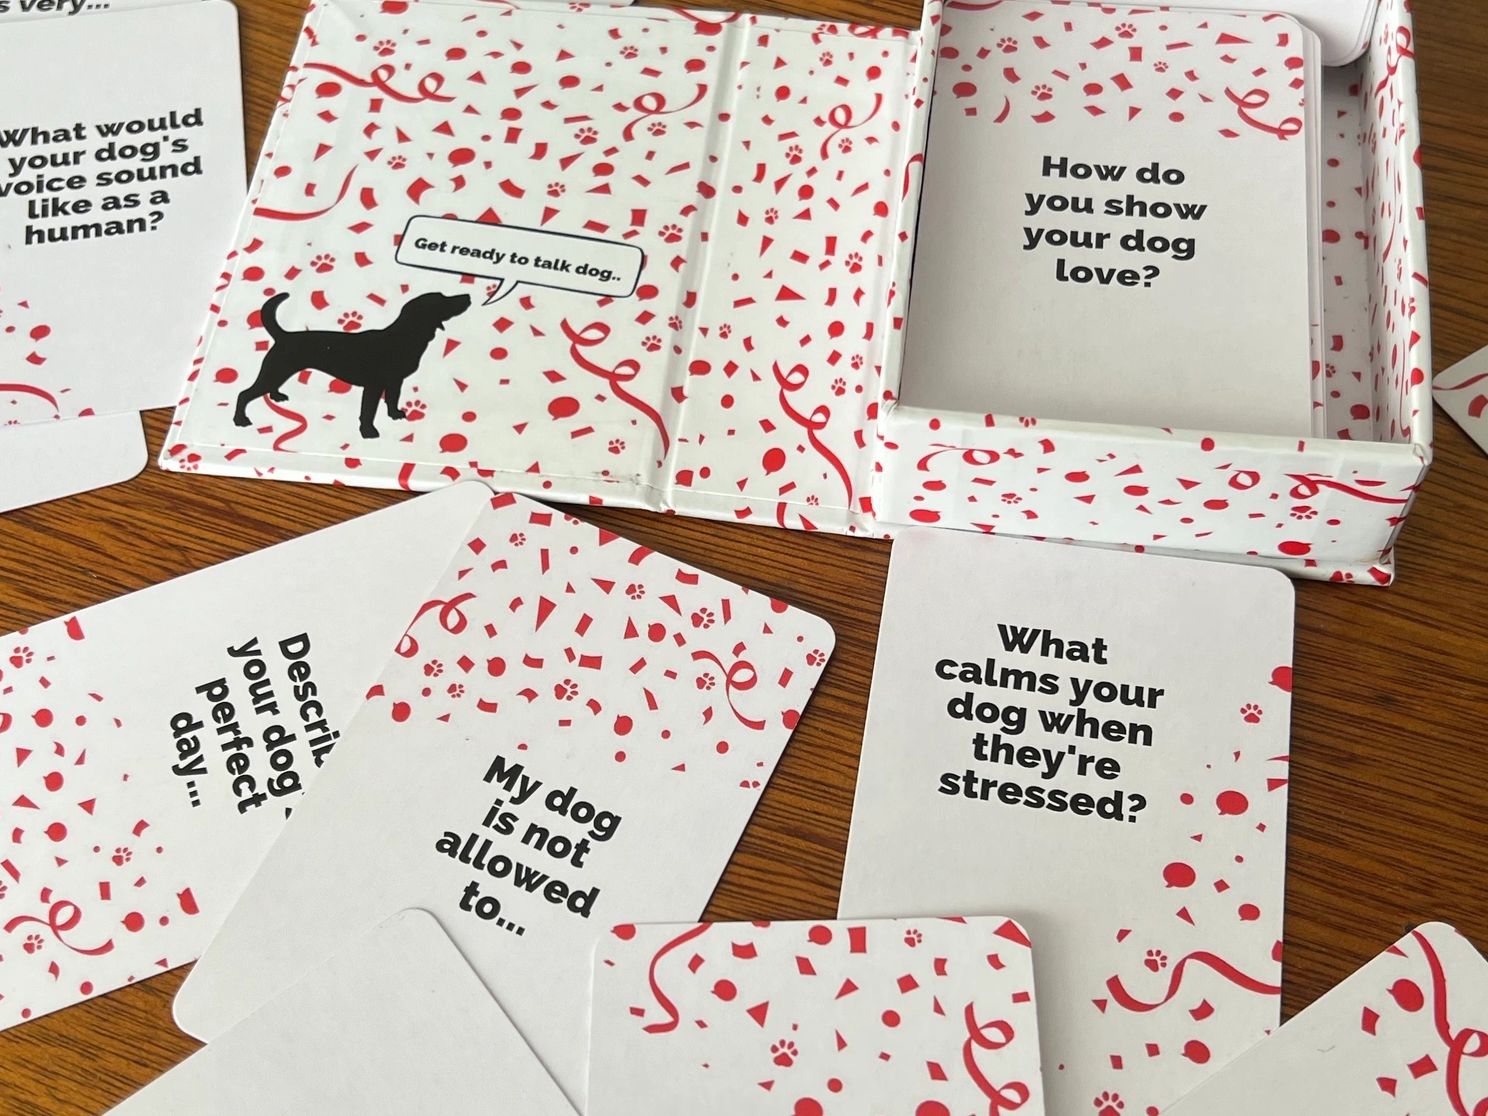 Dog Talk Conversation Starter Cards get you talking about your dogs and sharing favorite dog stories